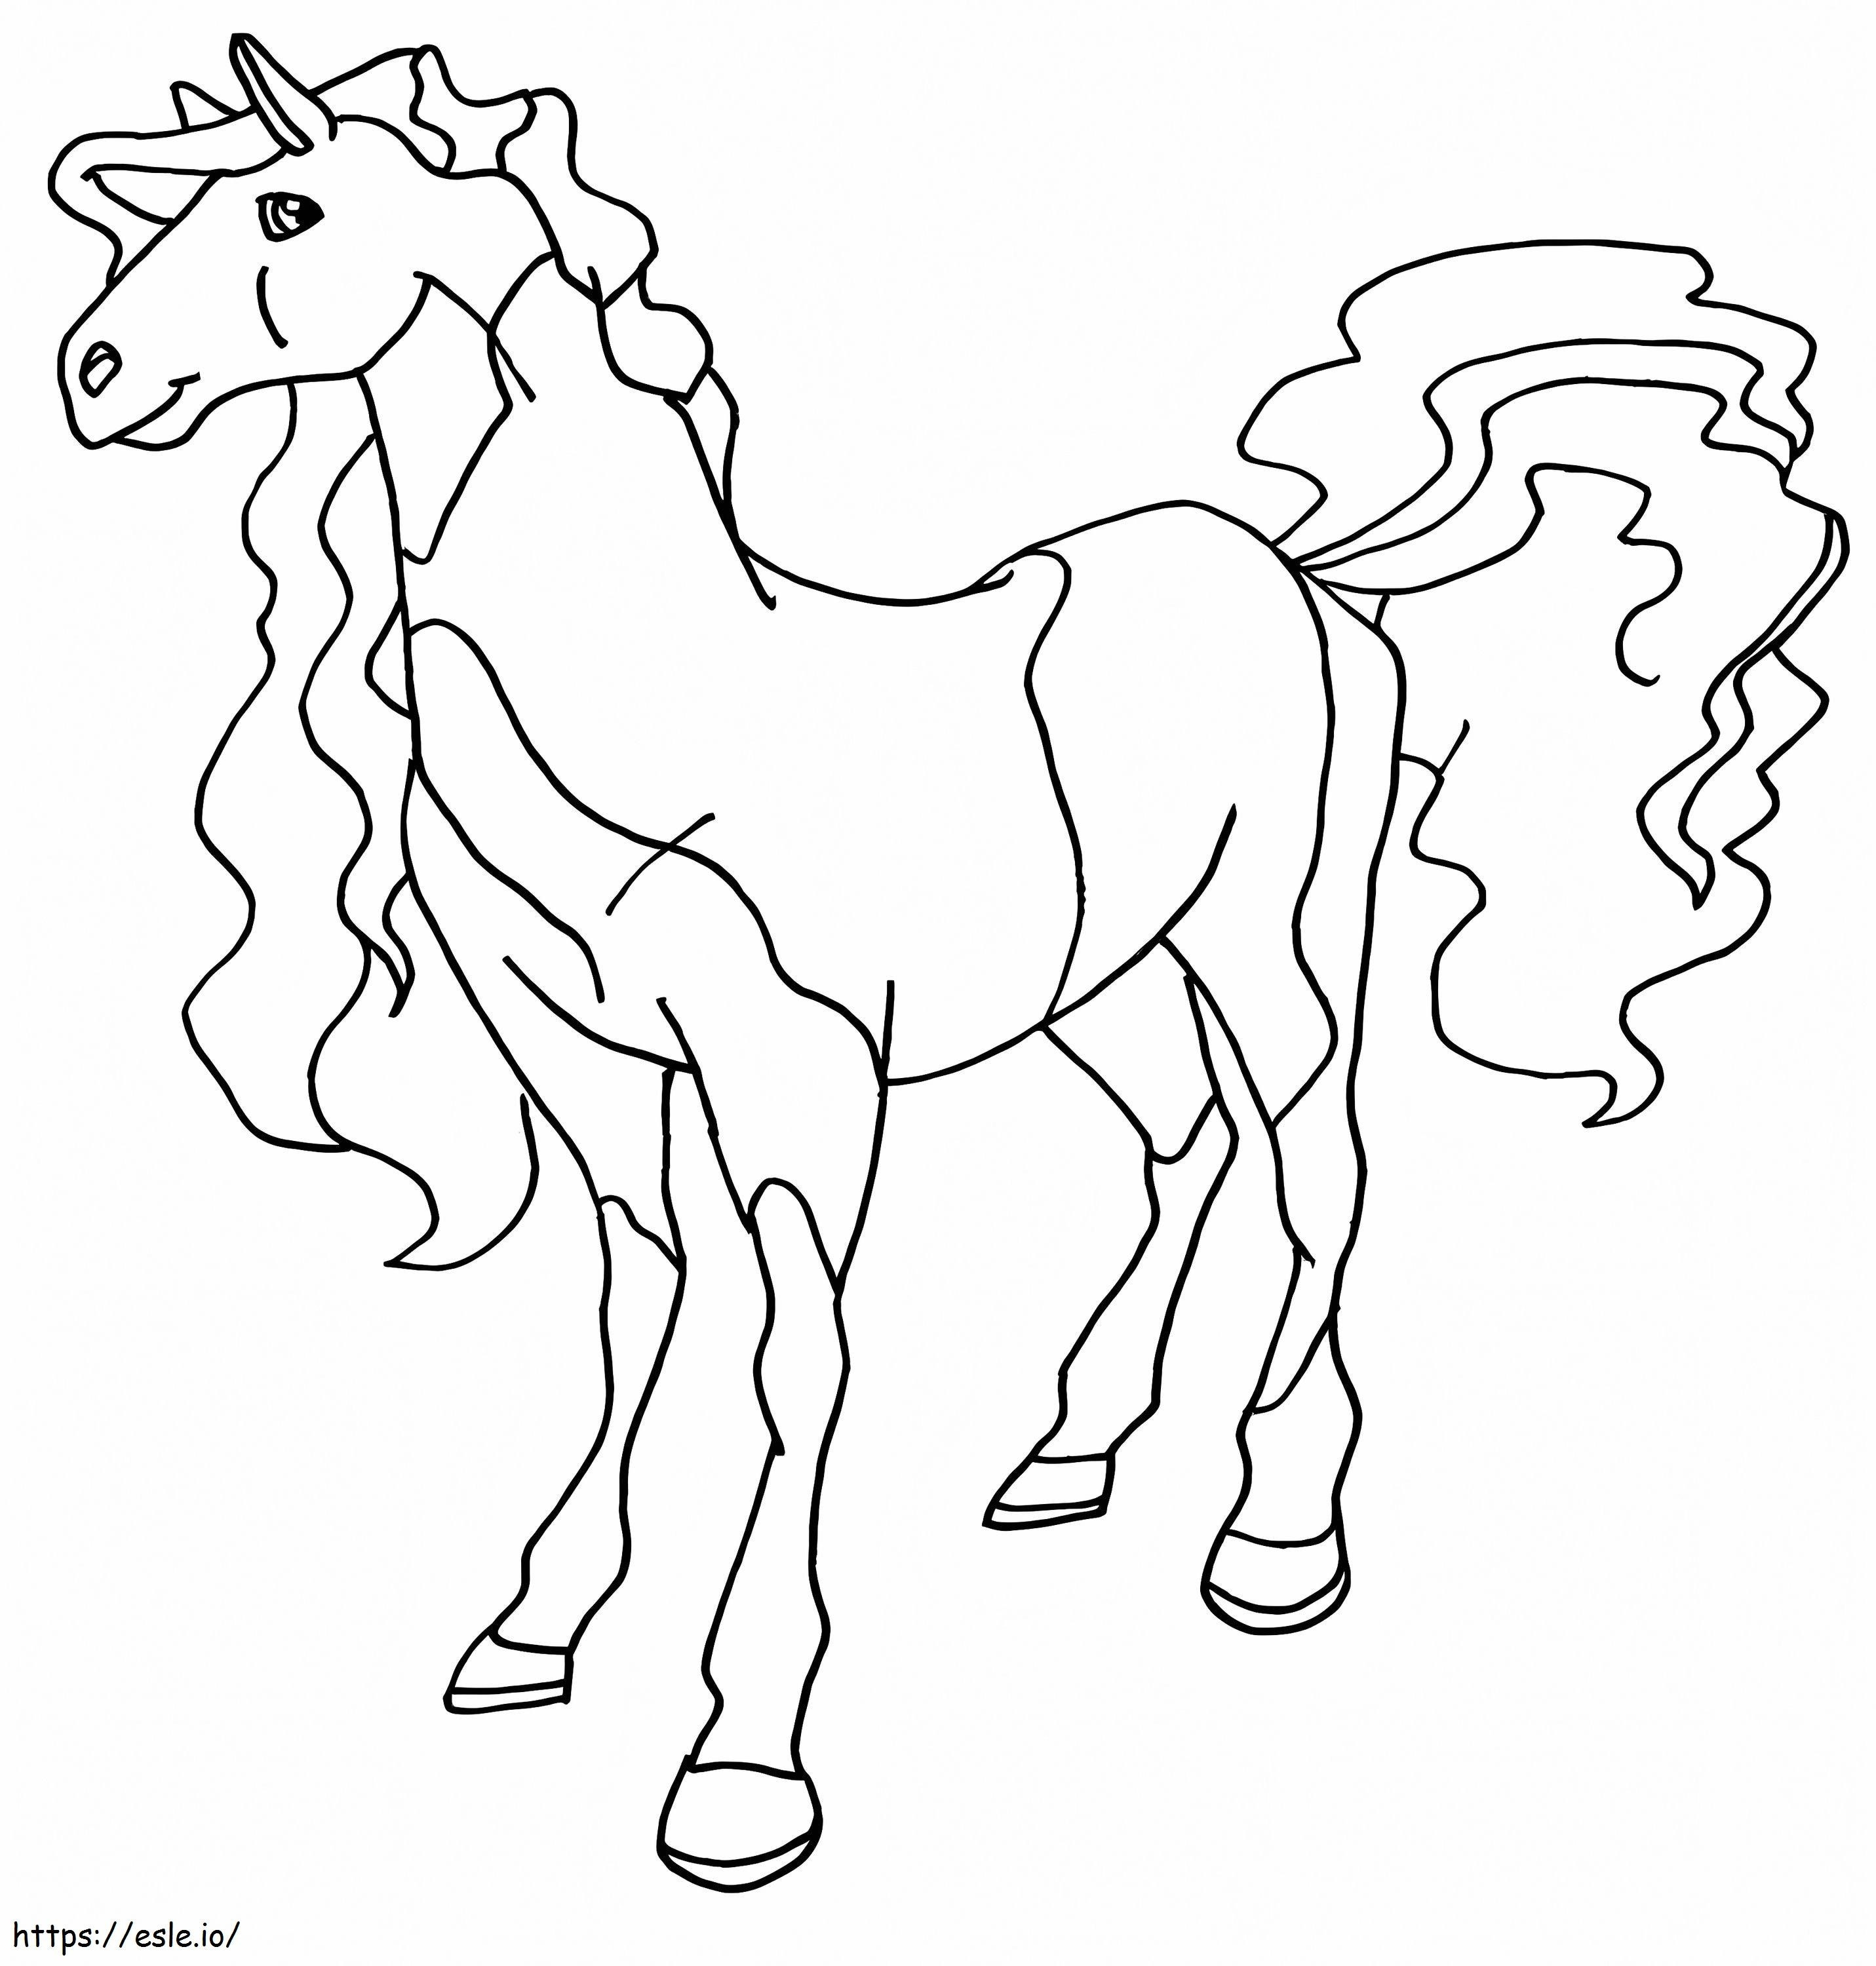 Horseland 1 coloring page